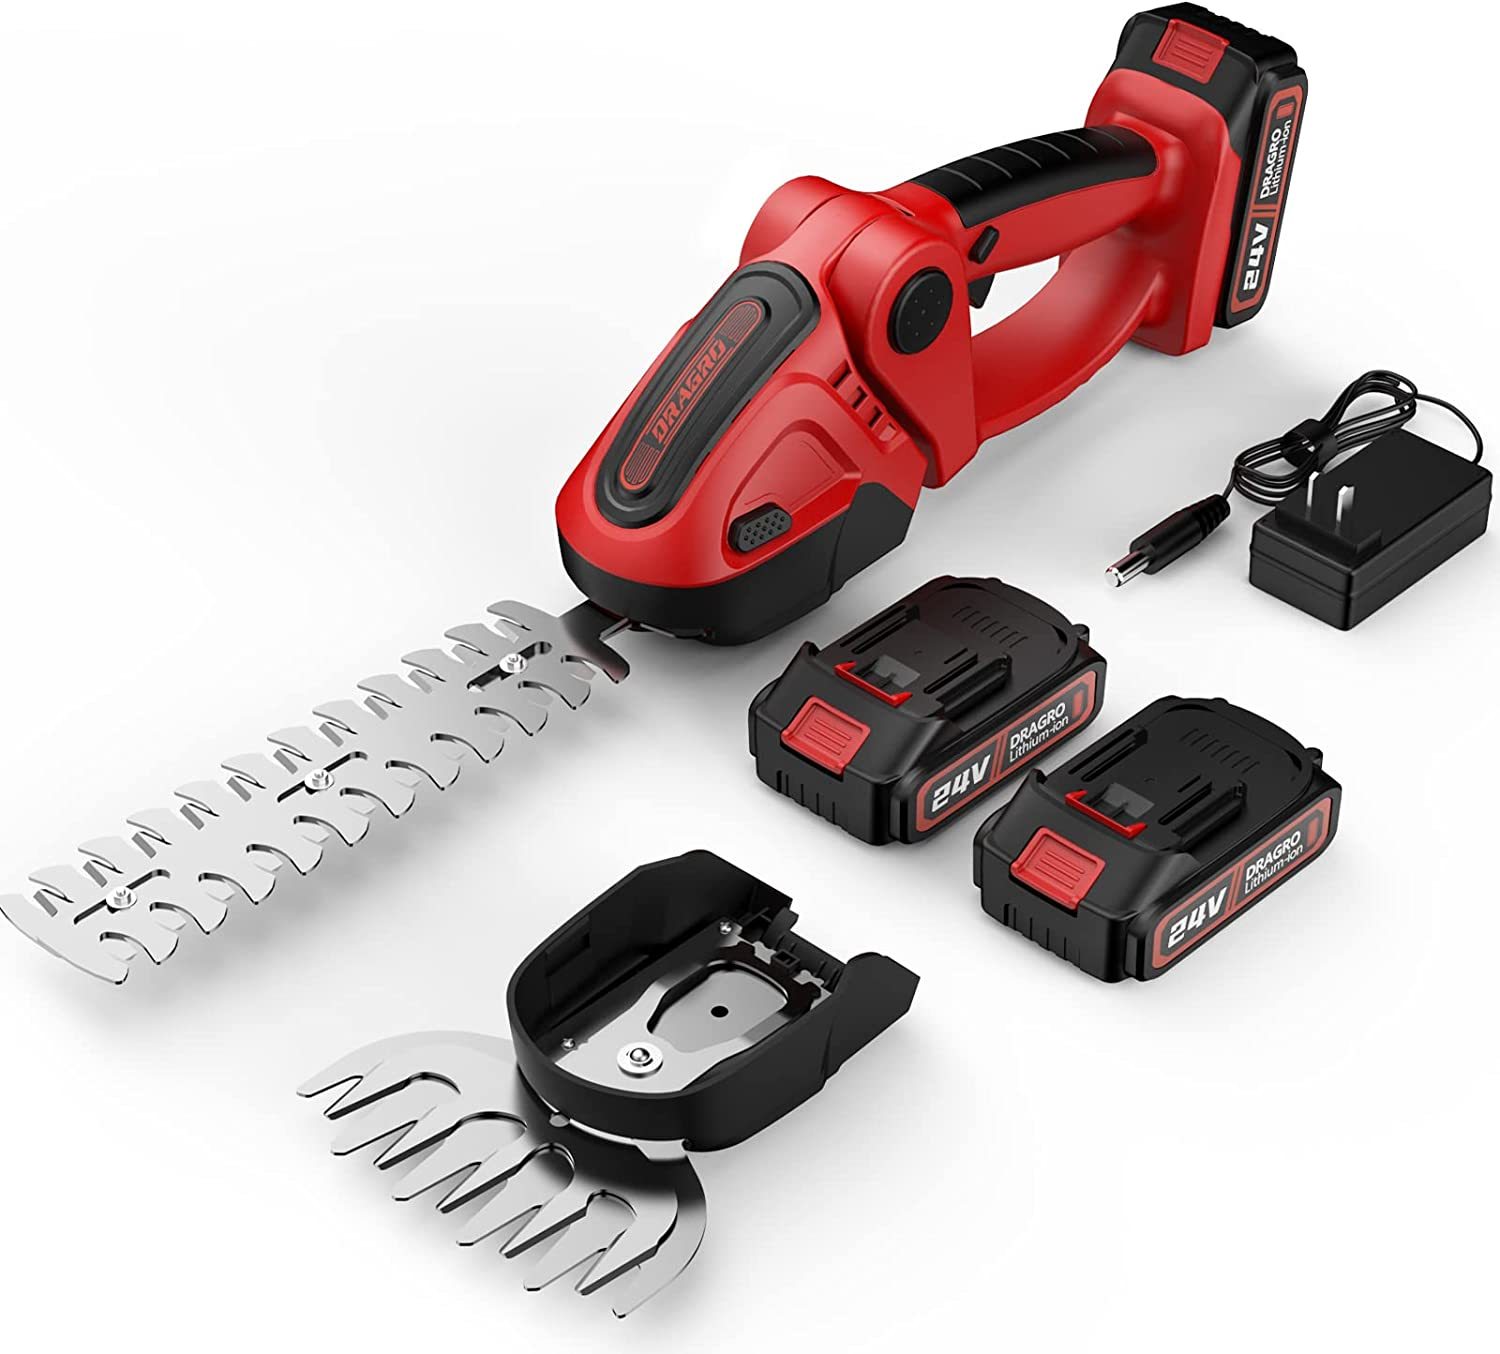 Cordless Grass Shears, in Electric Mini and 50 similar items